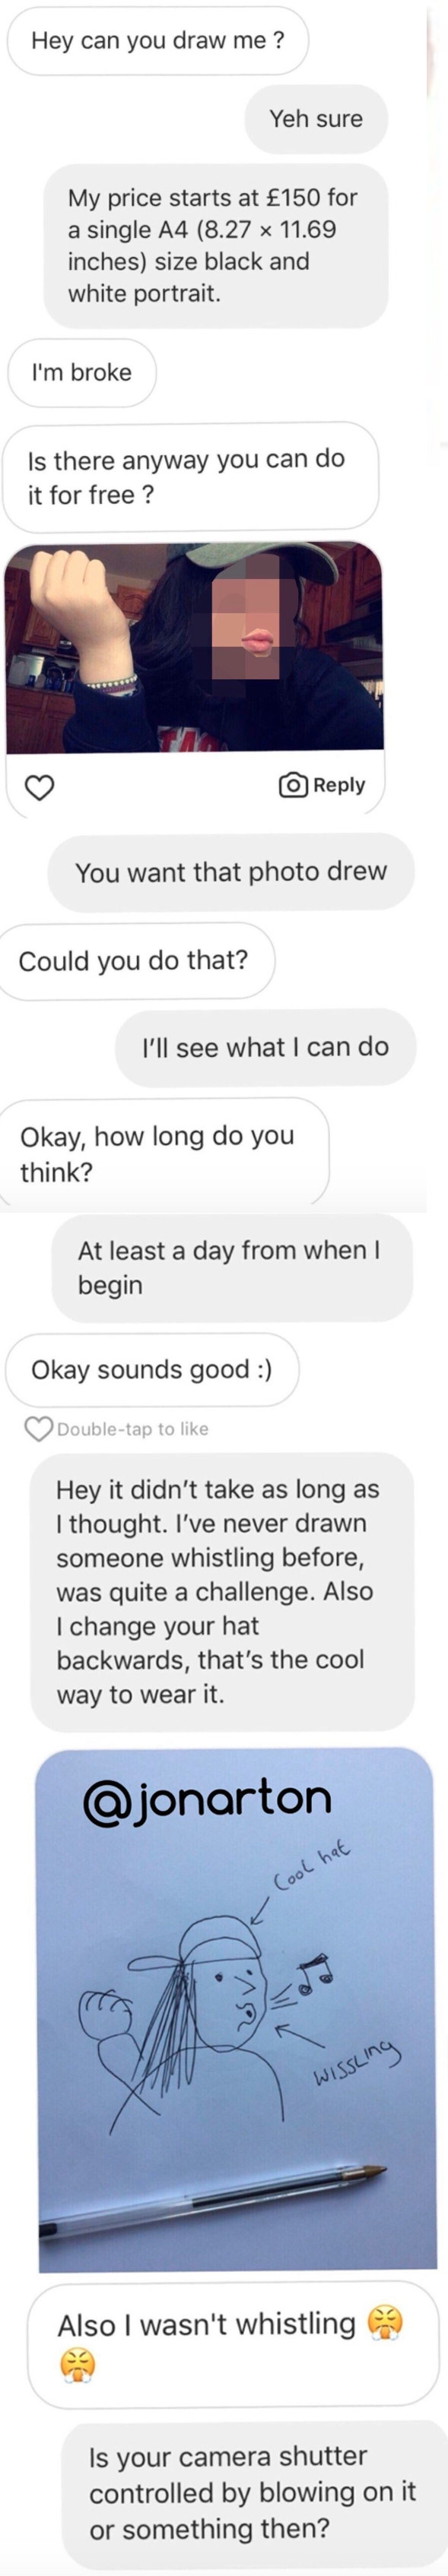 Person asks for a photo, artist says prices start at 150 pounds, person says they&#x27;re broke and can they do it for free, and artist sends back a stick figure